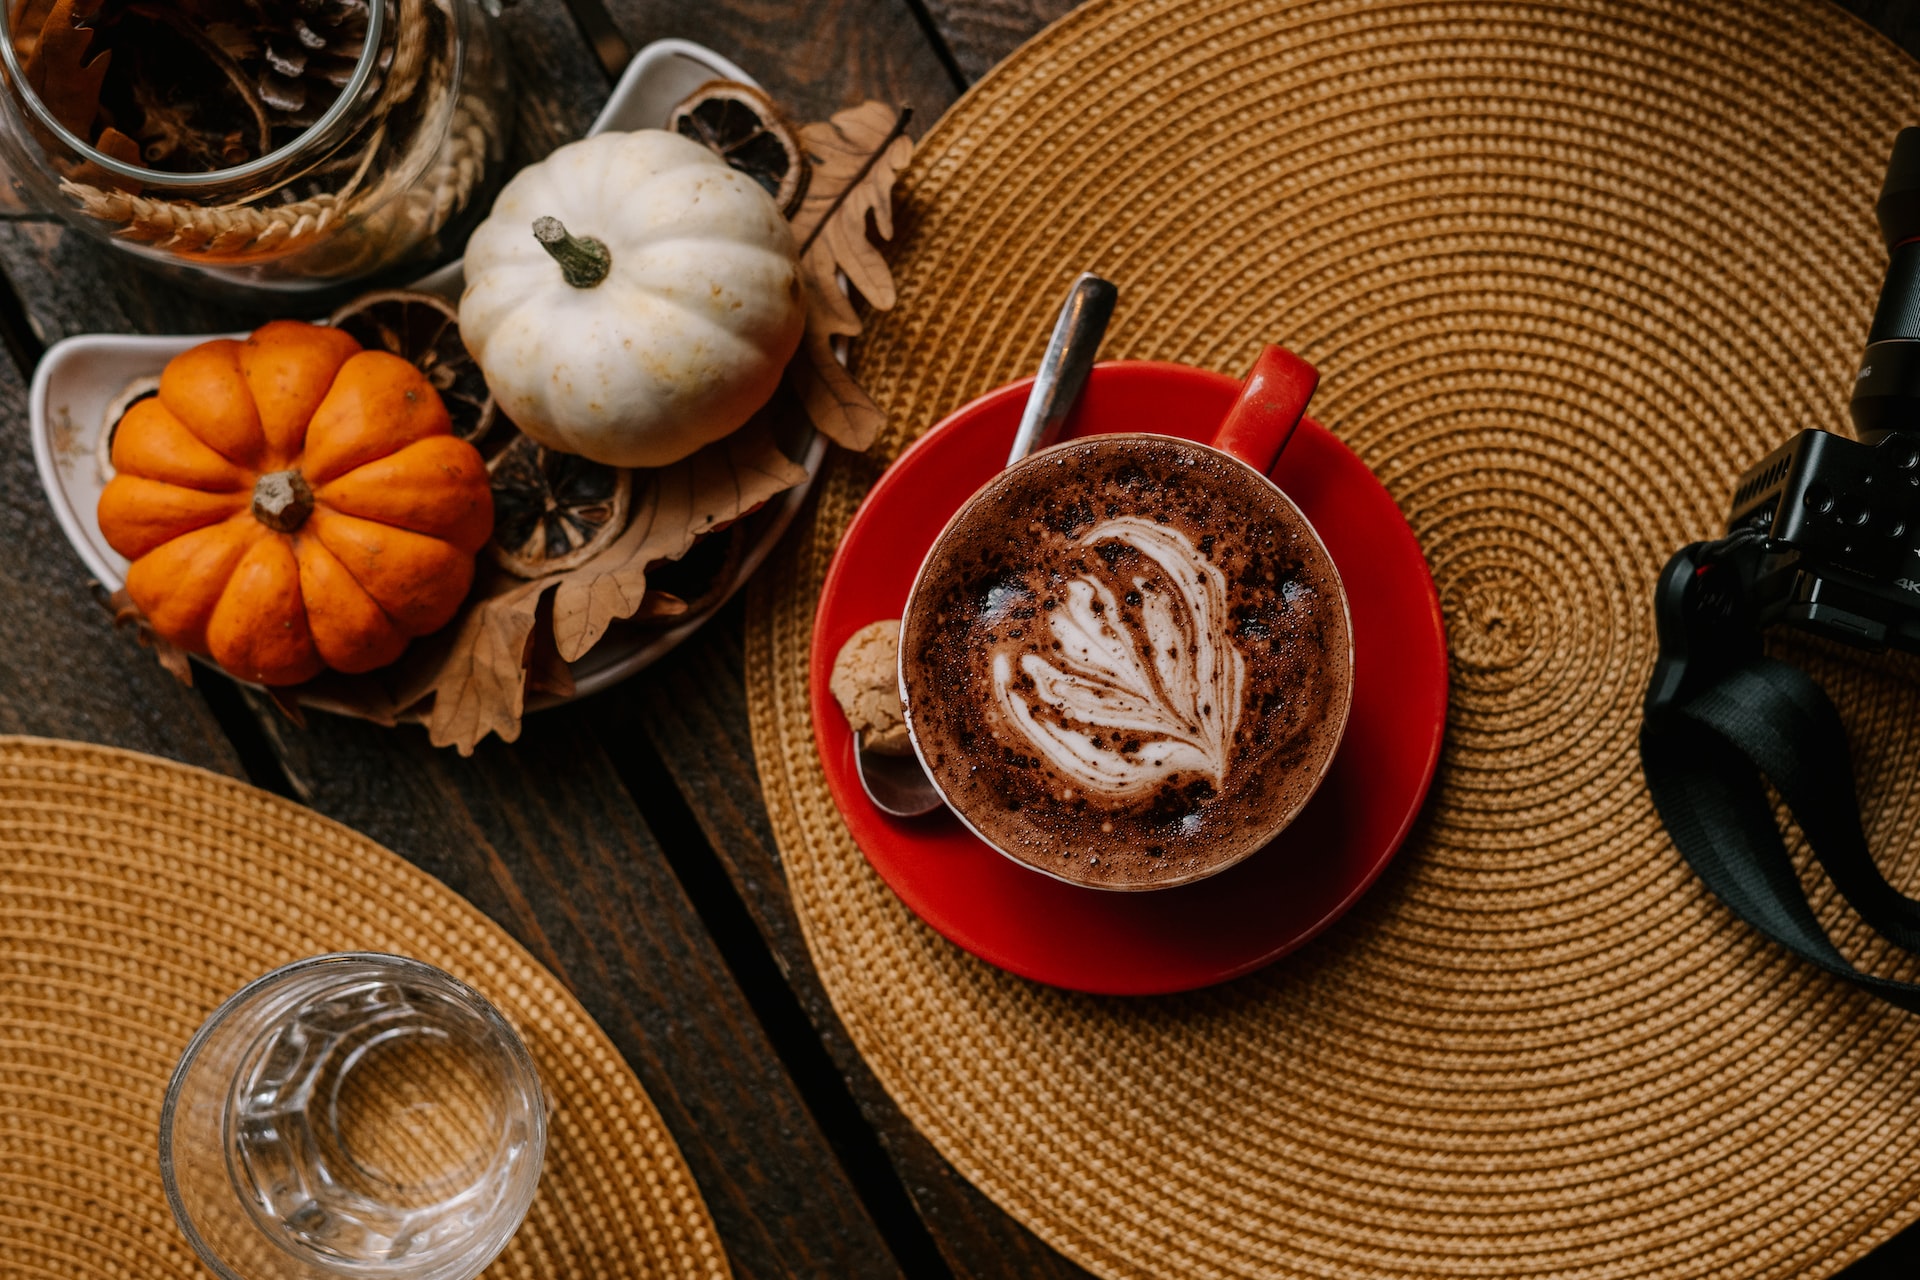 Delicious pumpkin lattes in New York making it one of the best fall food destinations!
